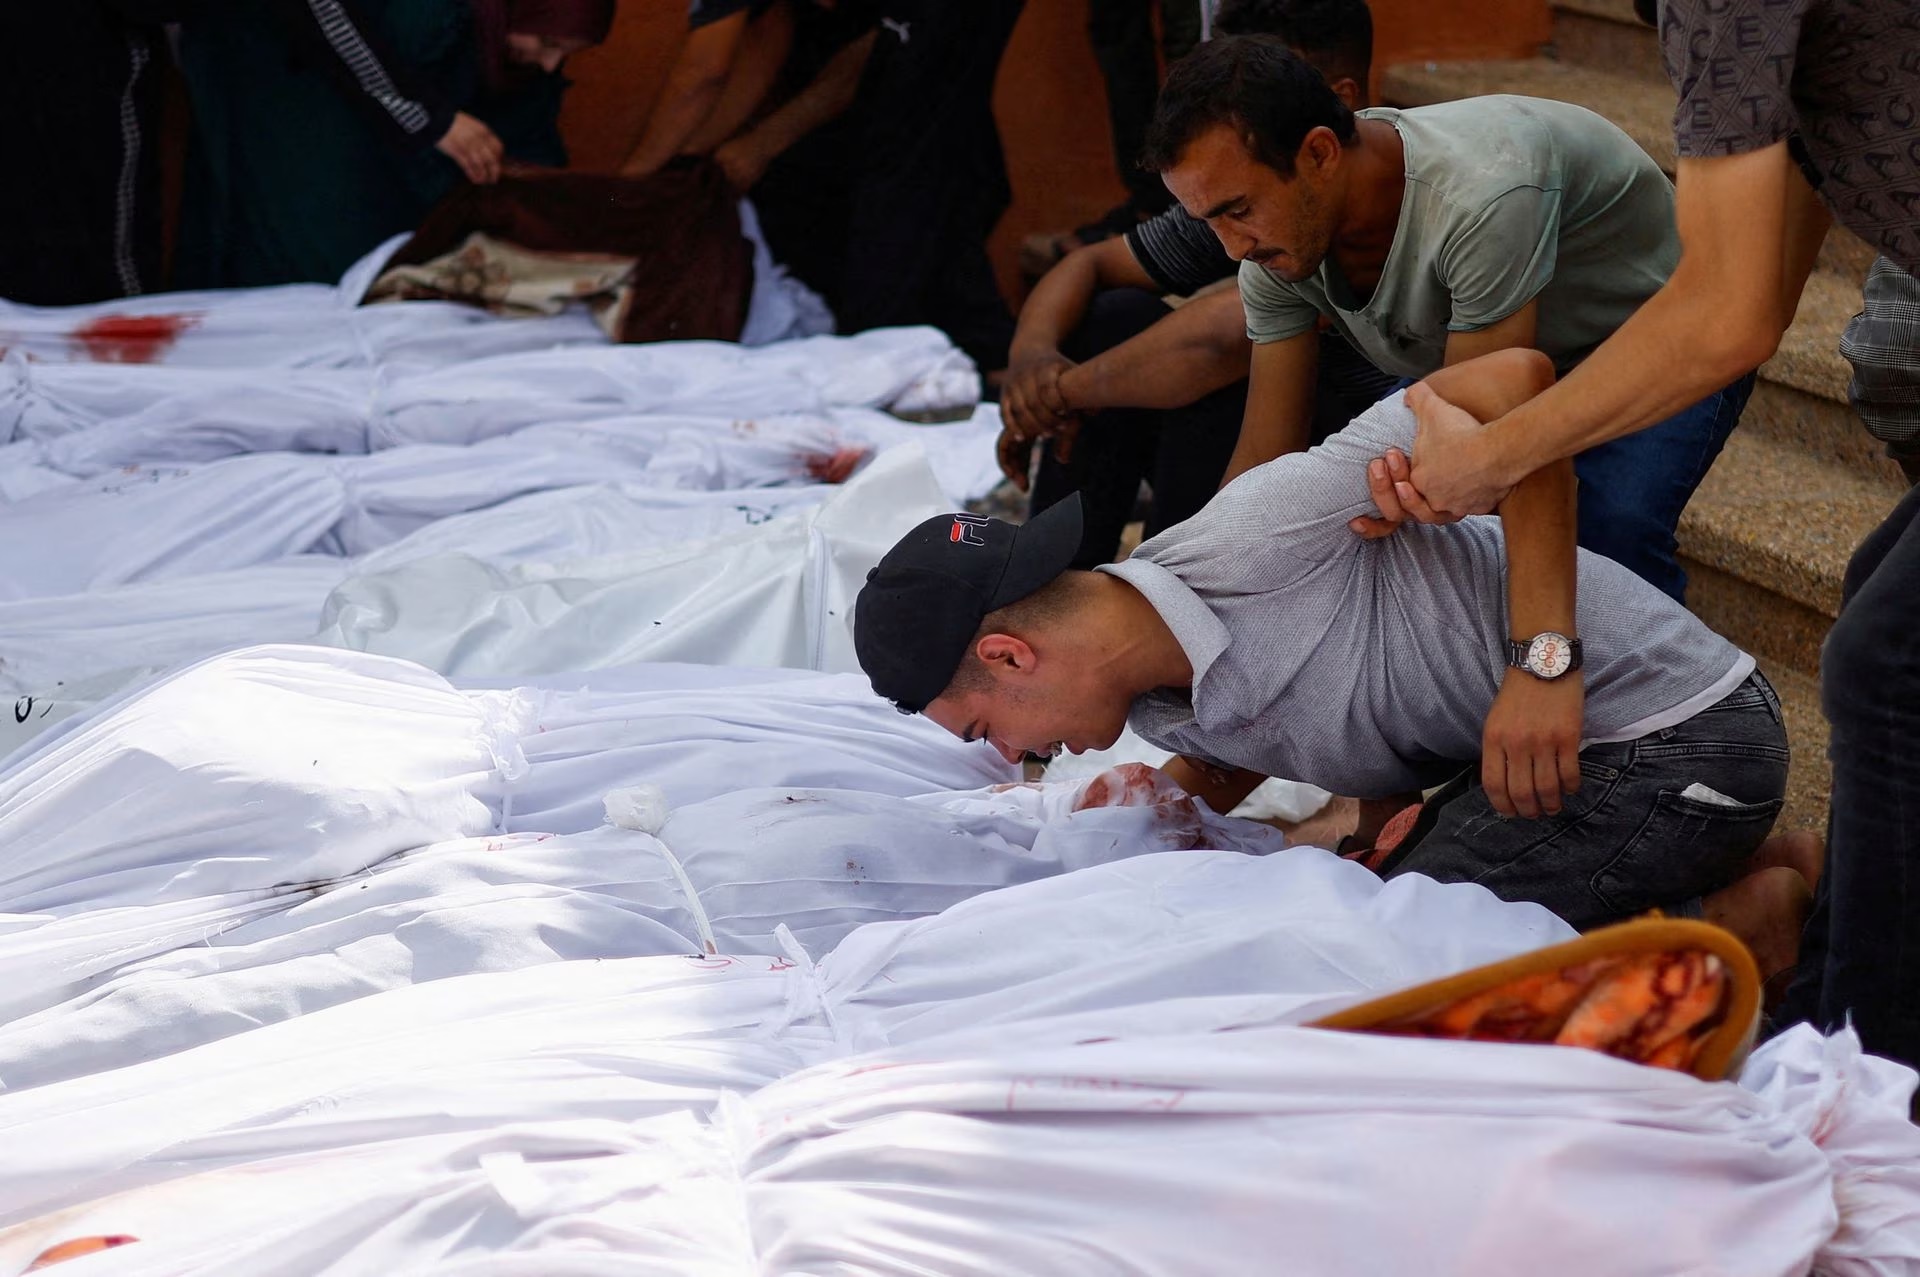 Mourners react next to the bodies of Palestinians killed in Israeli strikes, at a hospital in Khan Younis in the southern Gaza Strip, October 17.